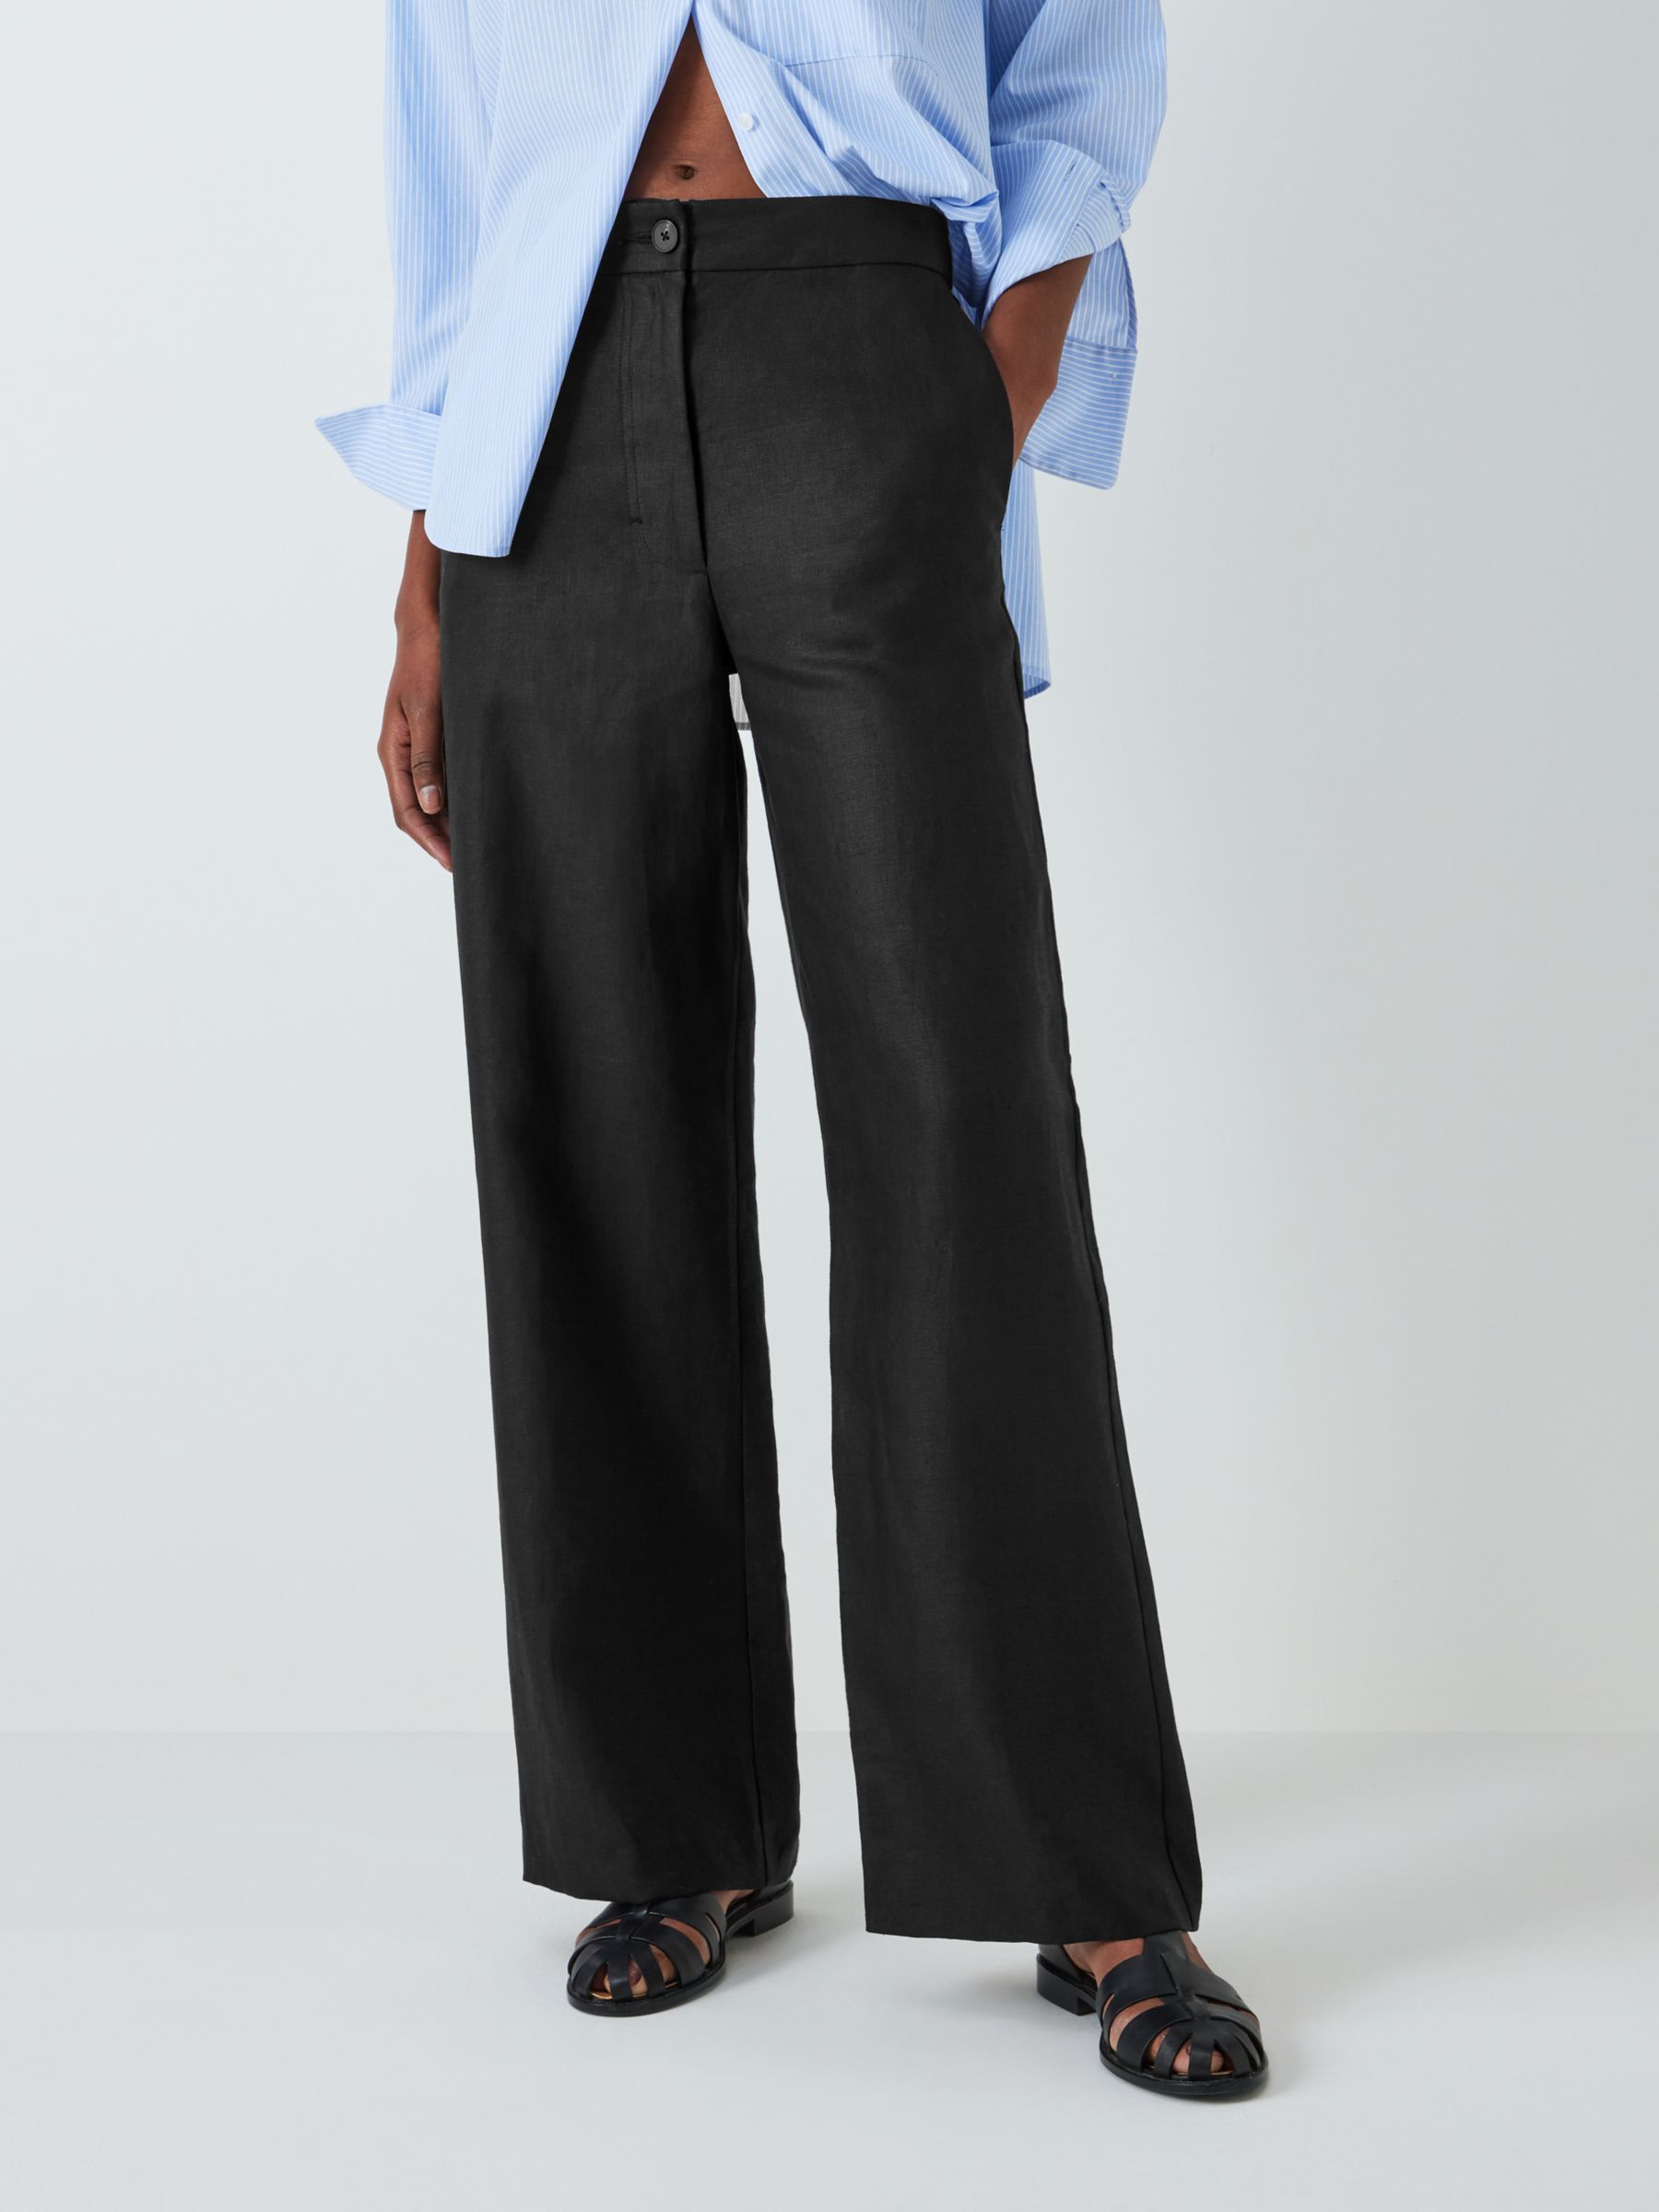 Women's Black Tailored Trousers